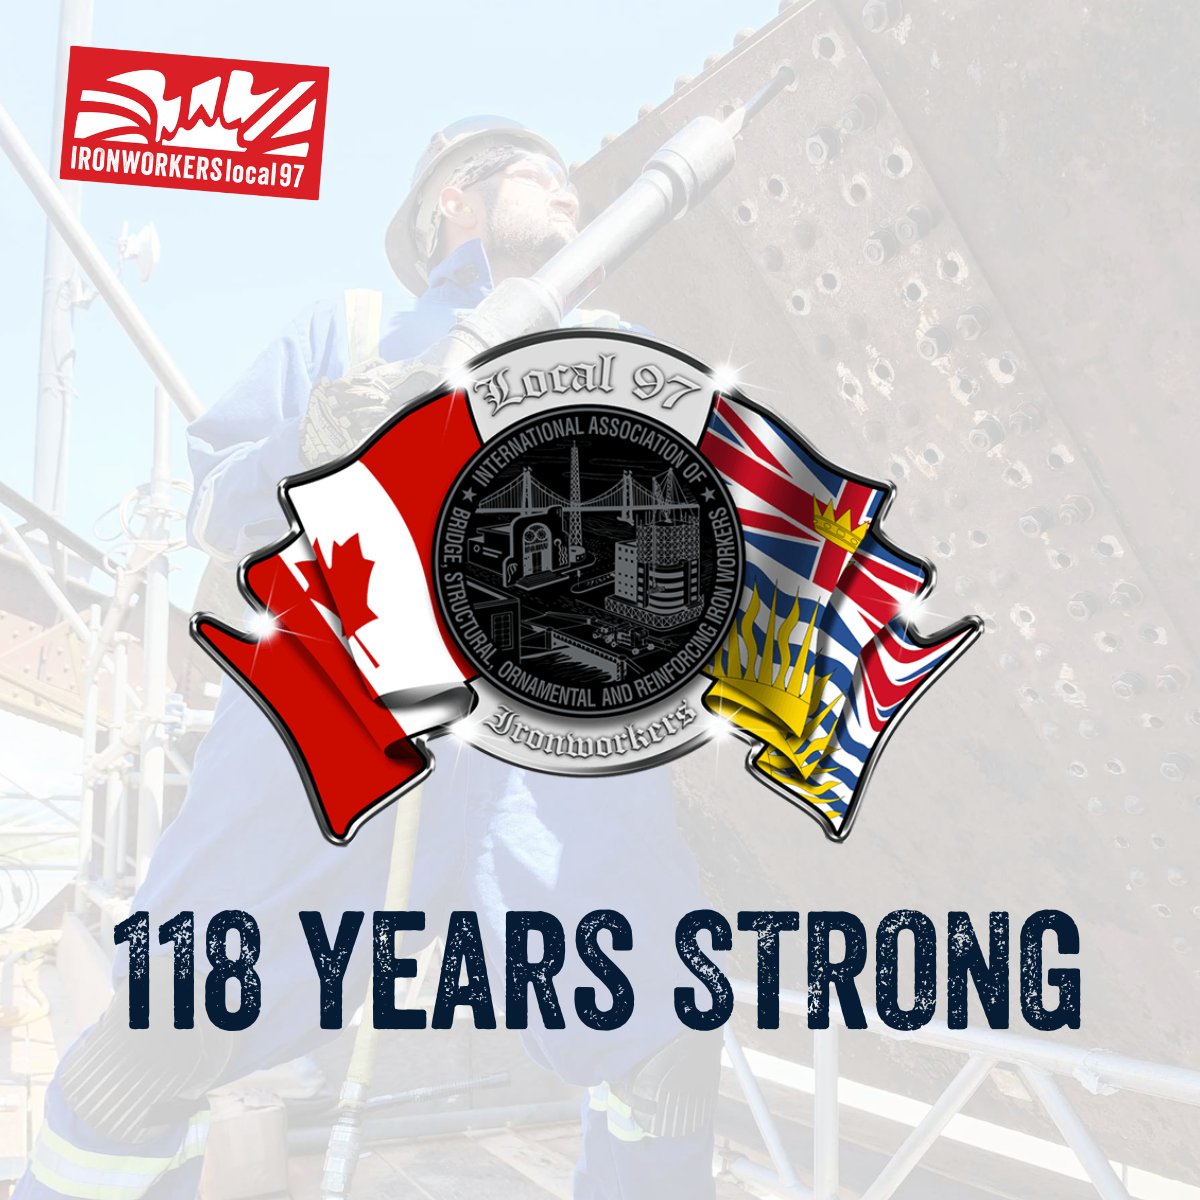 On May 11th, 1906, fifteen skilled men passionate about #ironwork signed the Charter establishing Ironworkers Local 97. Since then, Local 97 has continued to promote the interests and welfare of its members while advancing the standards of the trade.